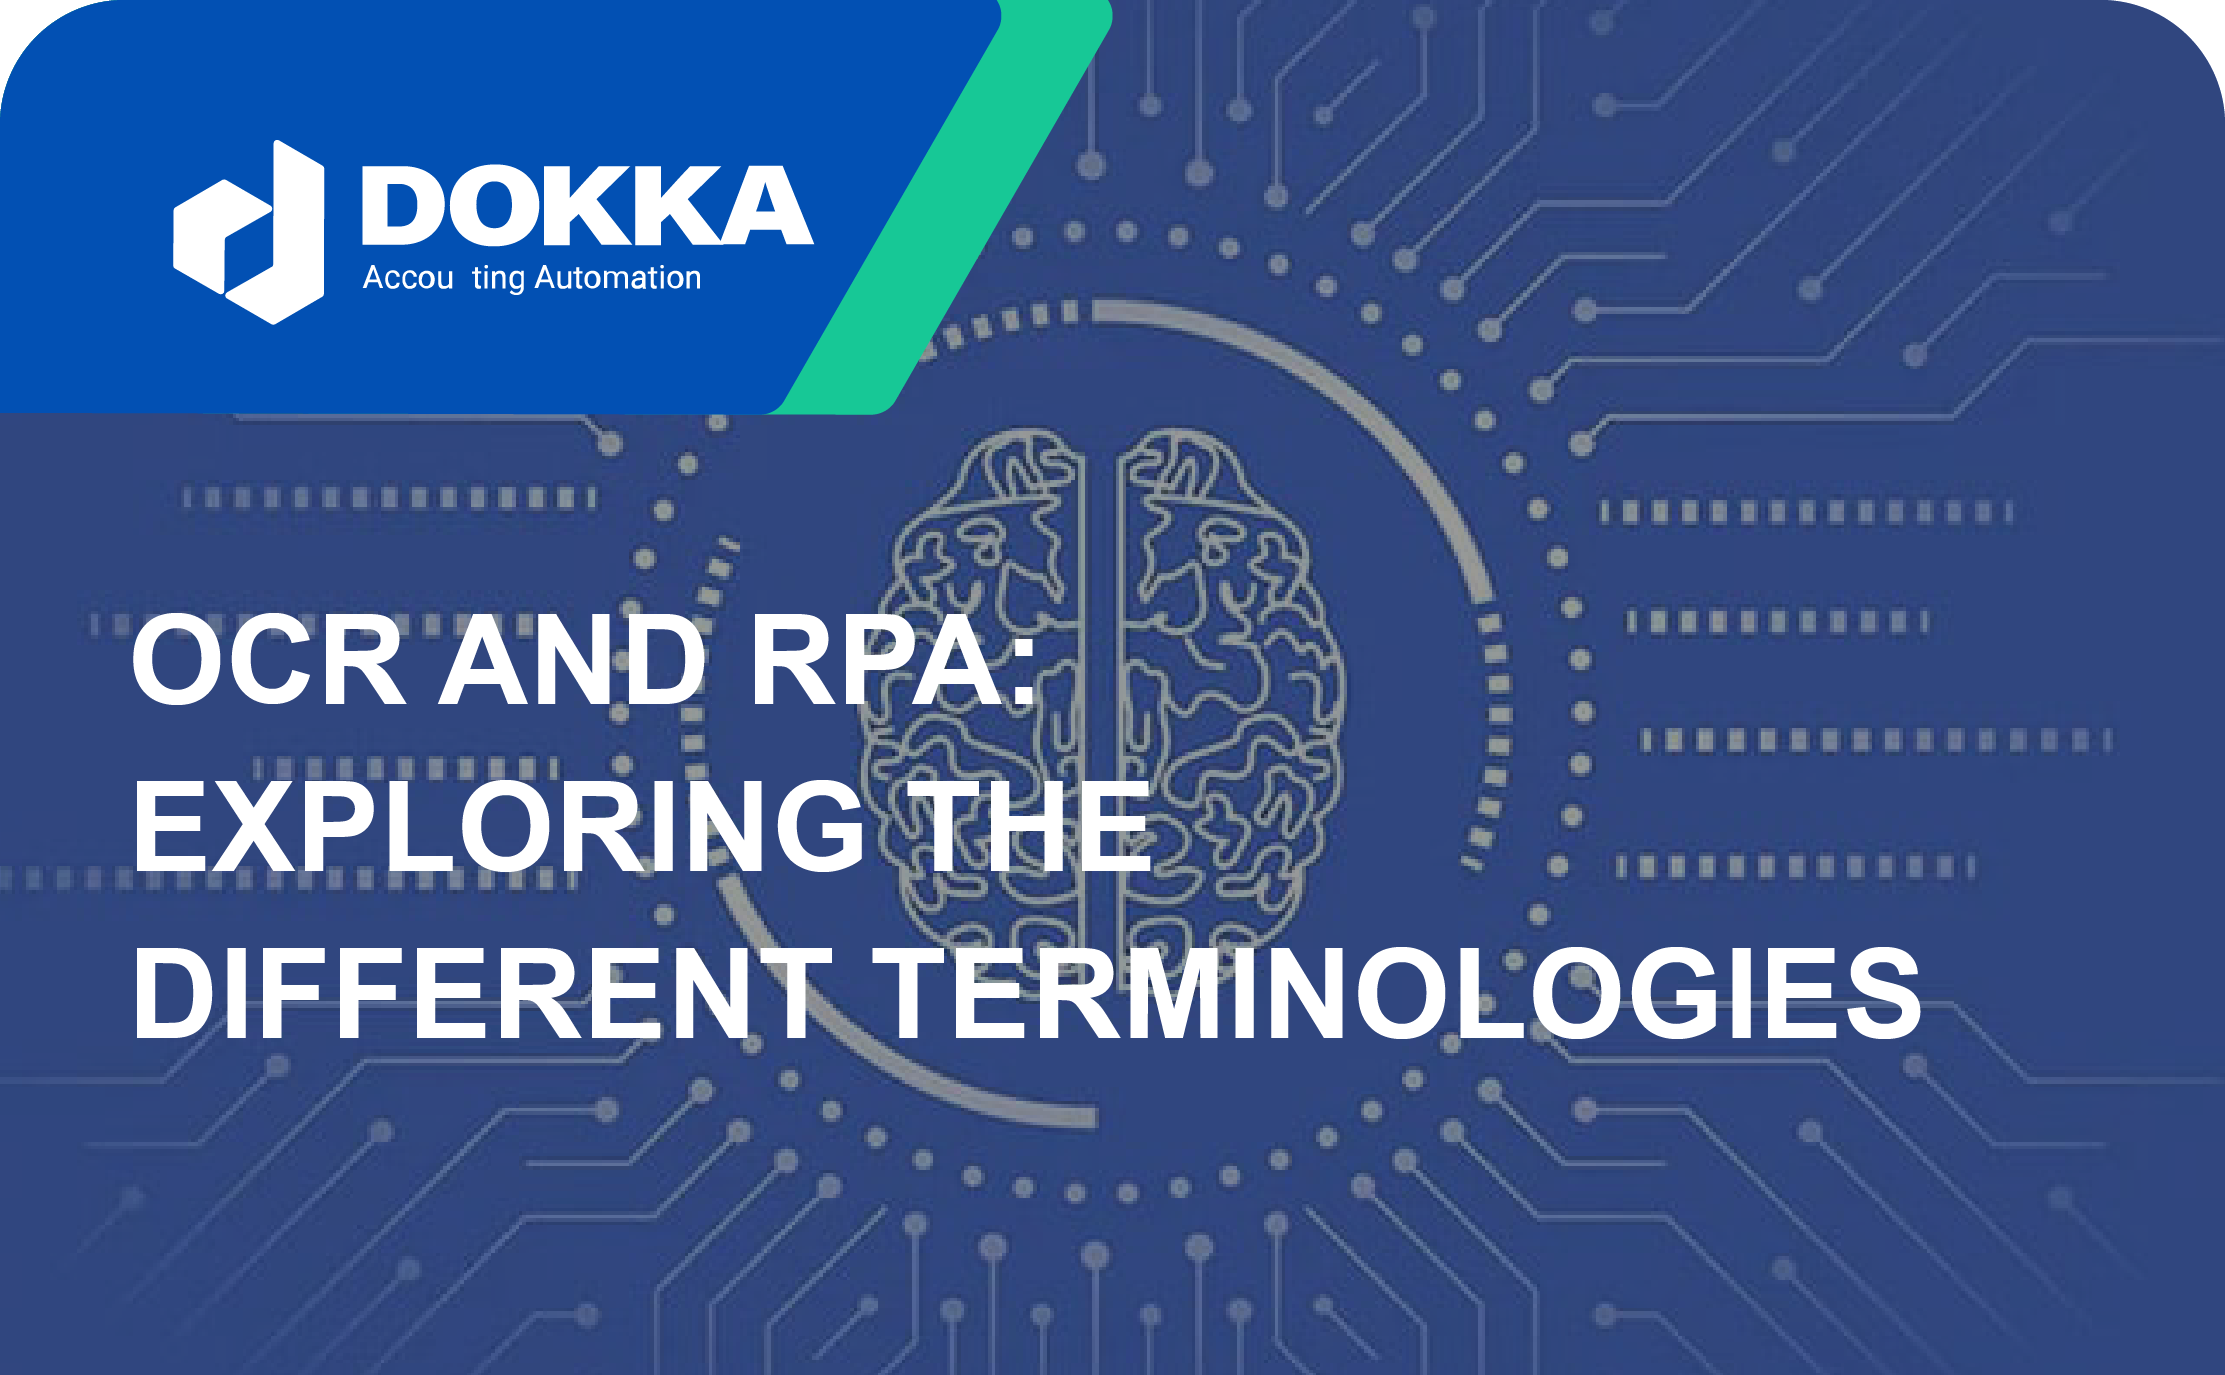 ocr and rpa